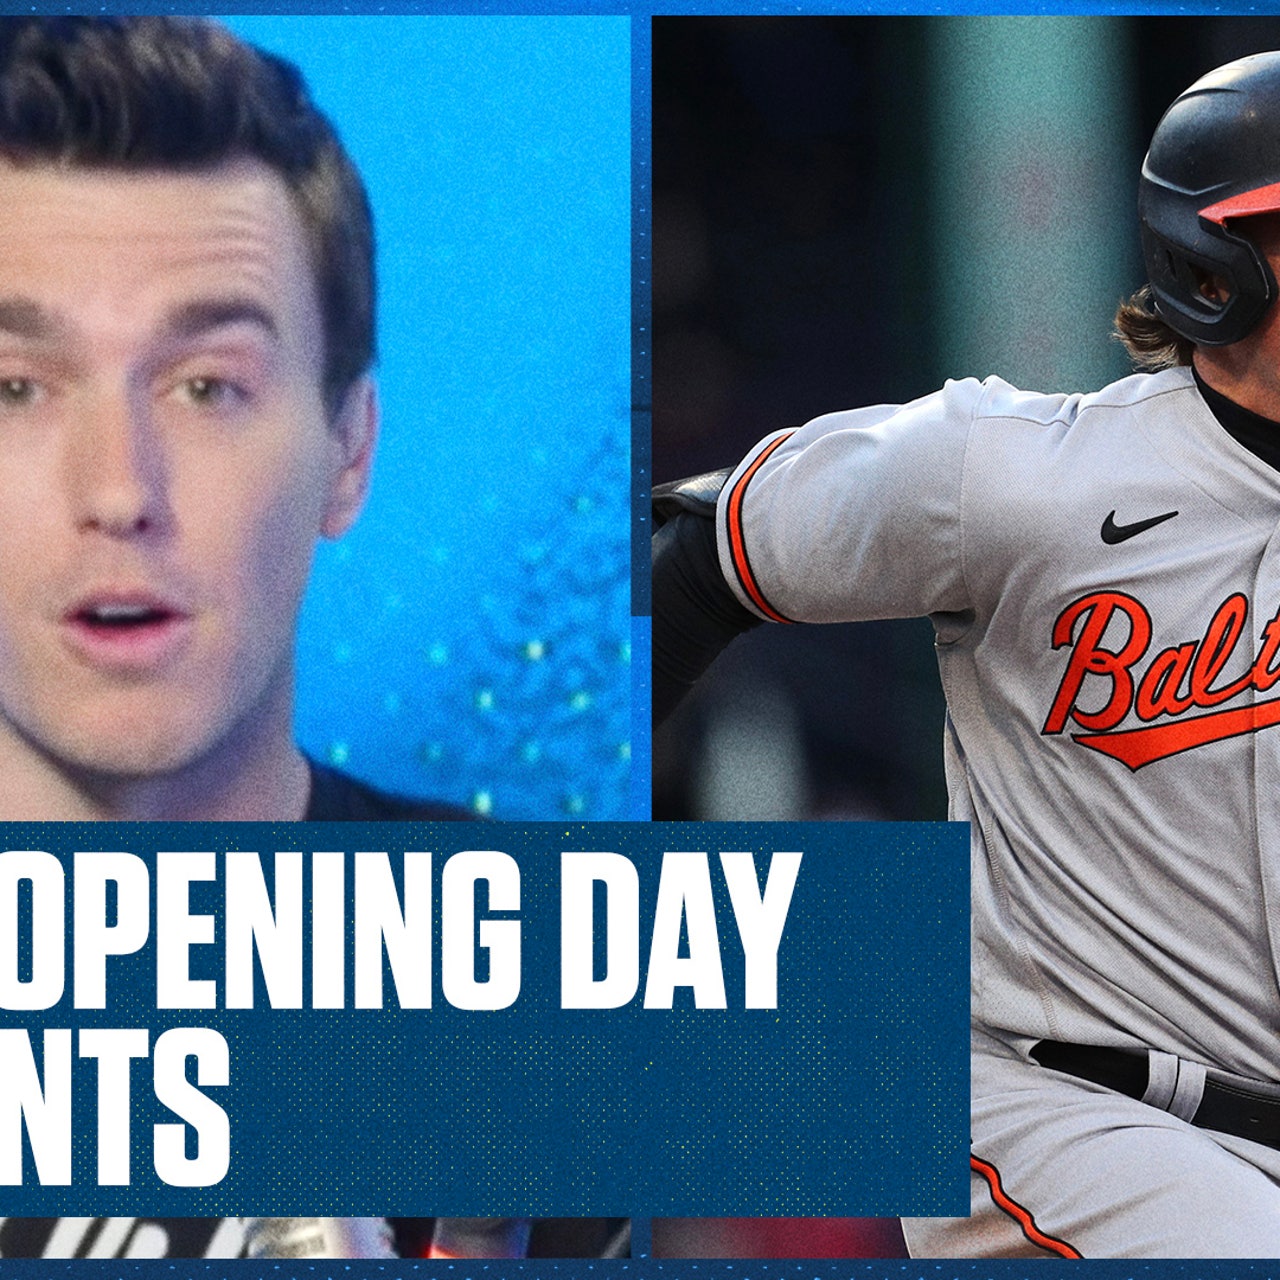 Baltimore Orioles Adley Rutschman's BIG day highlights the Top-3 Opening  Day Moments, Flippin' Bats